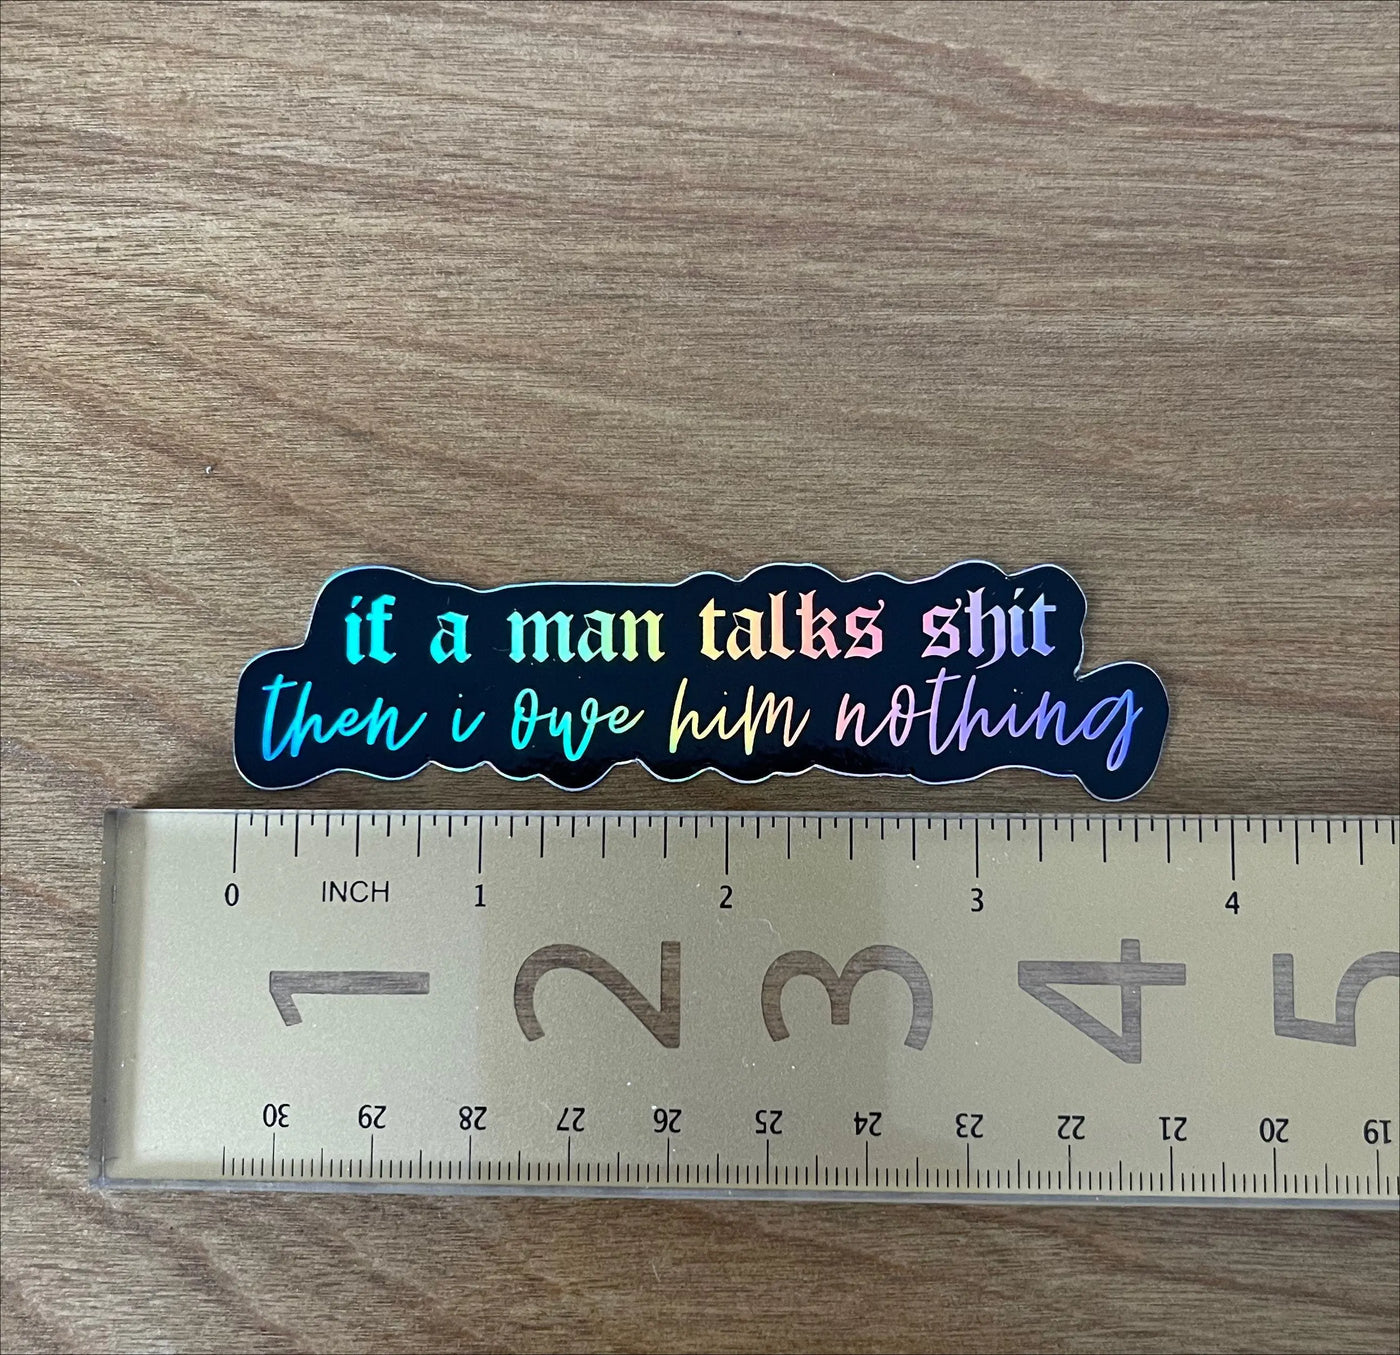 If a man talks shit then I owe him nothing holographic sticker MangoIllustrated